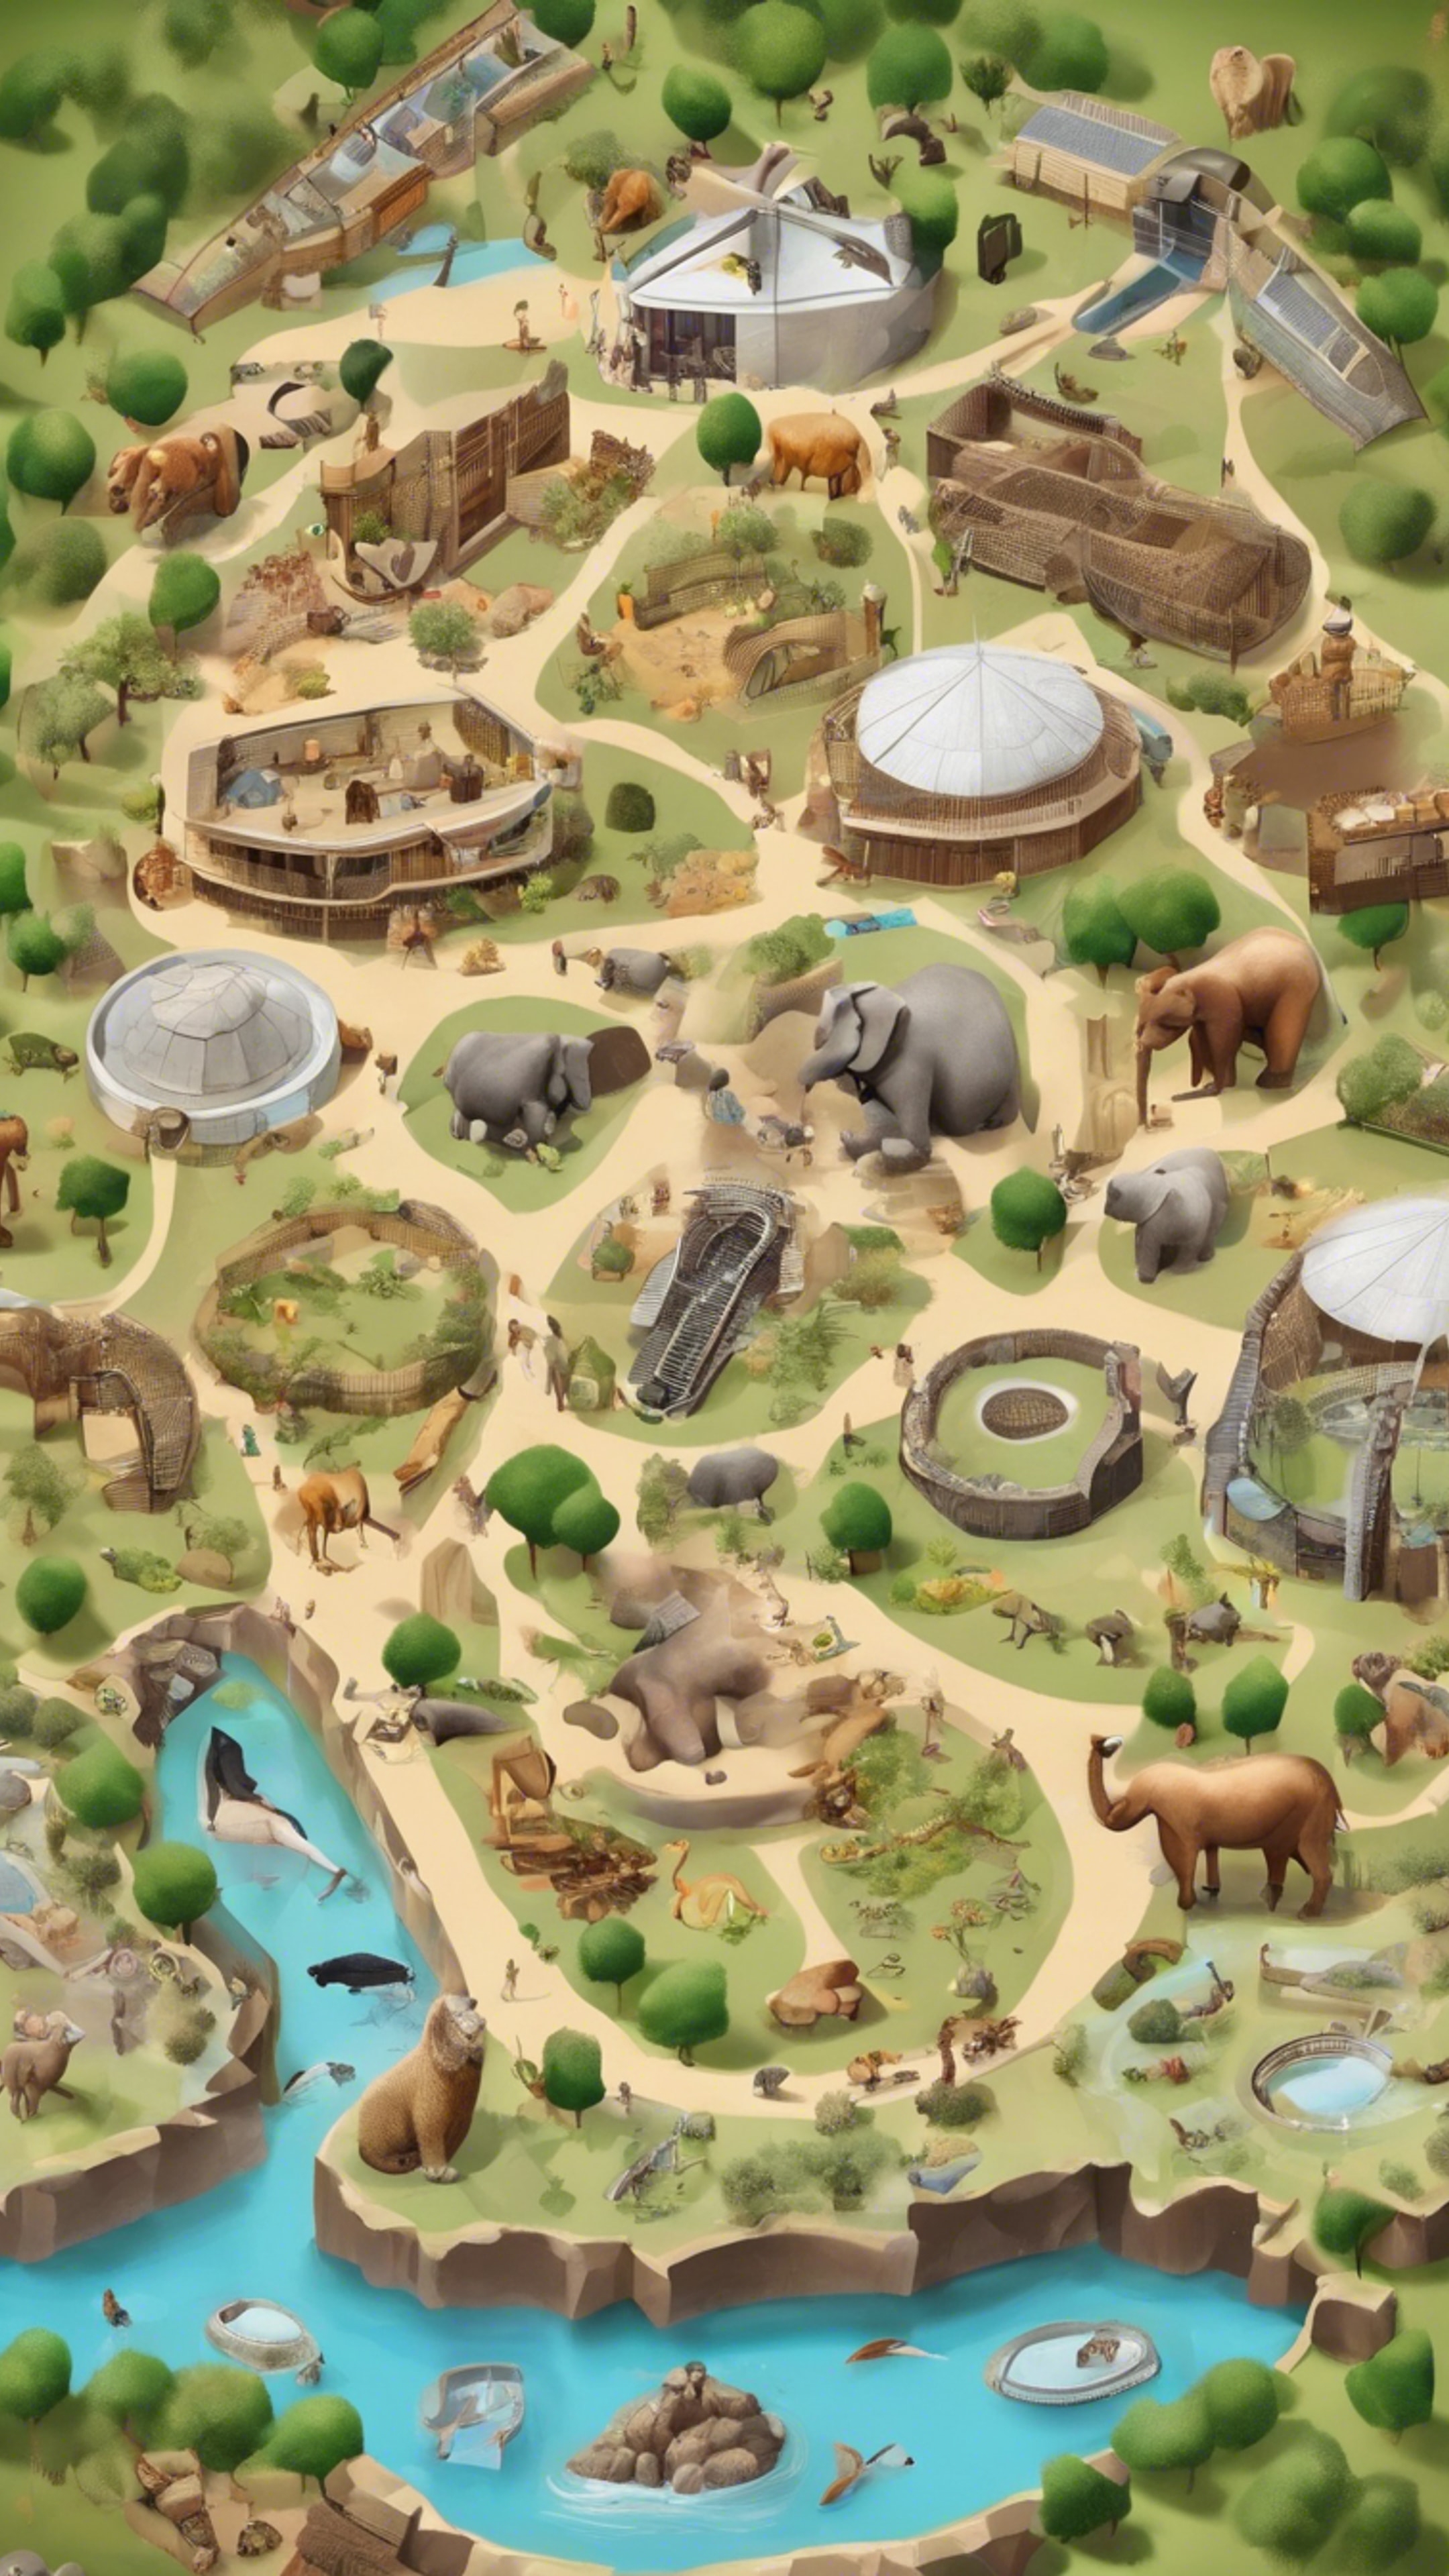 A graphic map of a zoo, with different animal enclosures, food stalls and amenities. Tapetai[7d3ed7eed3f244f7a17f]